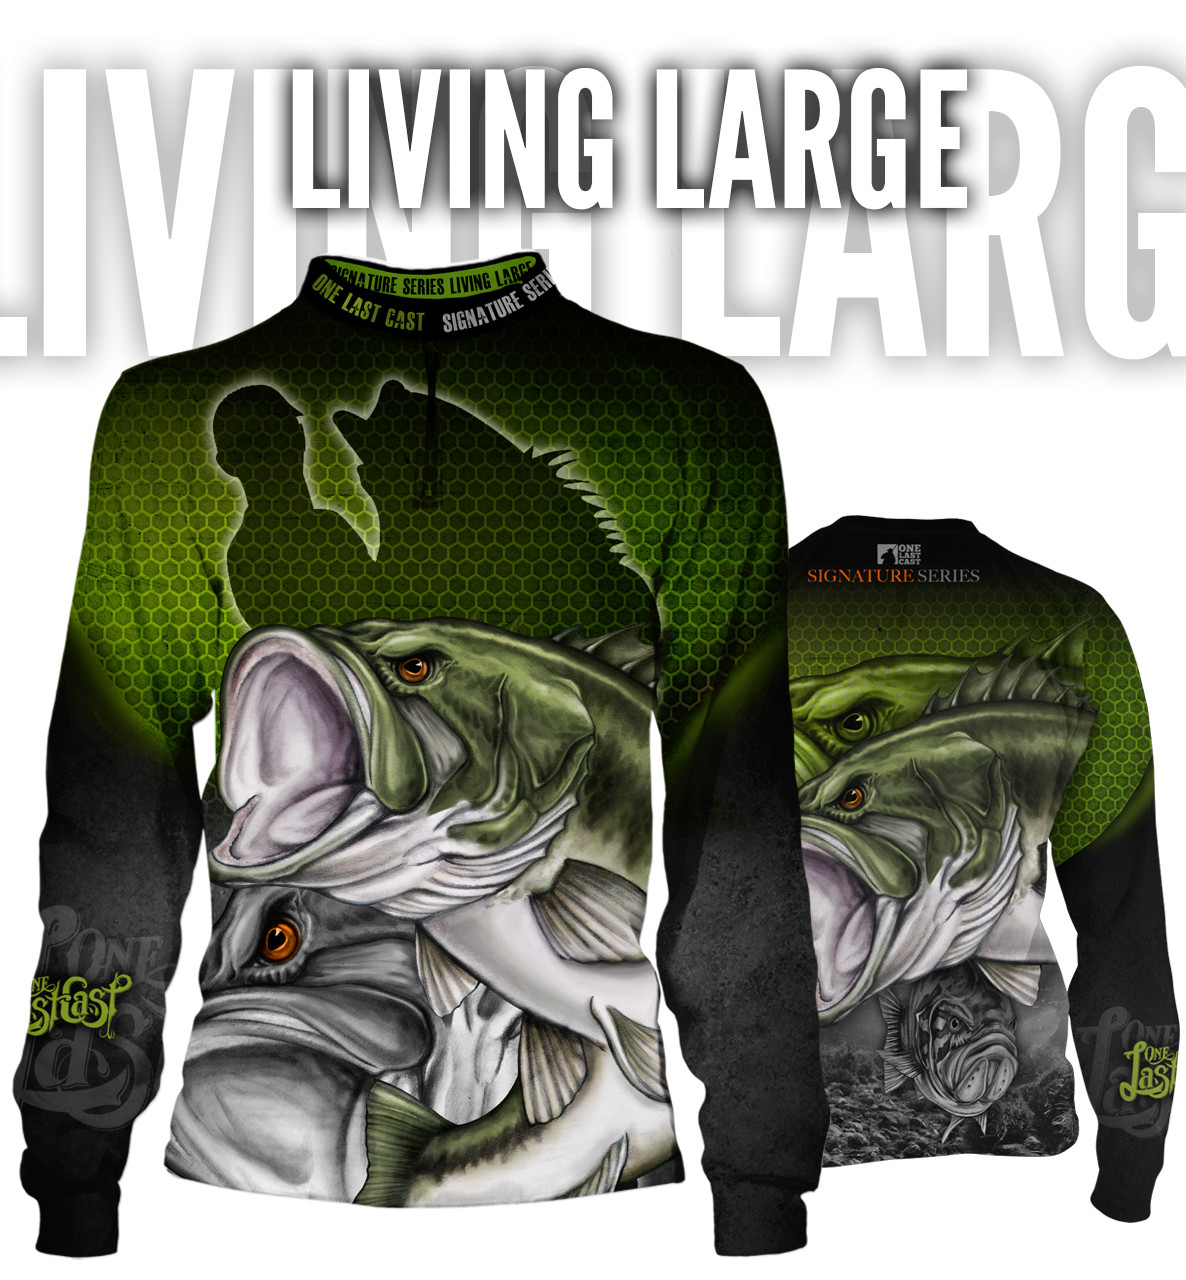 https://cdn11.bigcommerce.com/s-eemvl8dub3/images/stencil/1280x1280/products/219/987/Living_Large_Bass_Fishing_Jersey_Green_One_Last_Cast_Fishing_Clothing_Fishing_Jersey_Fishing_Hoodie__51430.1584613100.jpg?c=2?imbypass=on